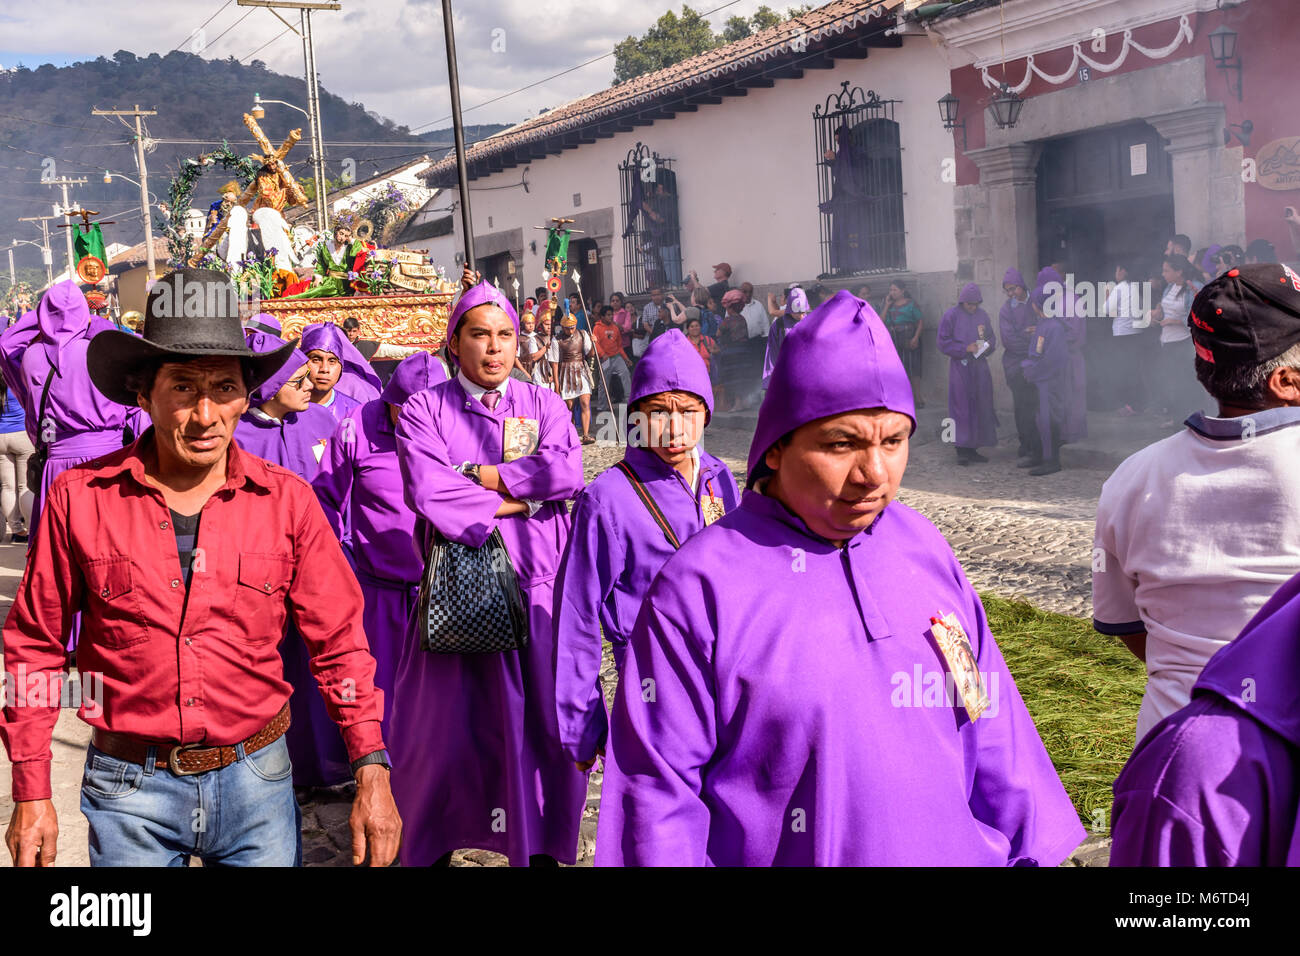 Antigua, Guatemala -  February 18, 2018: Procession on first Sunday of Lent in town with most famous Holy Week celebrations in Latin America Stock Photo